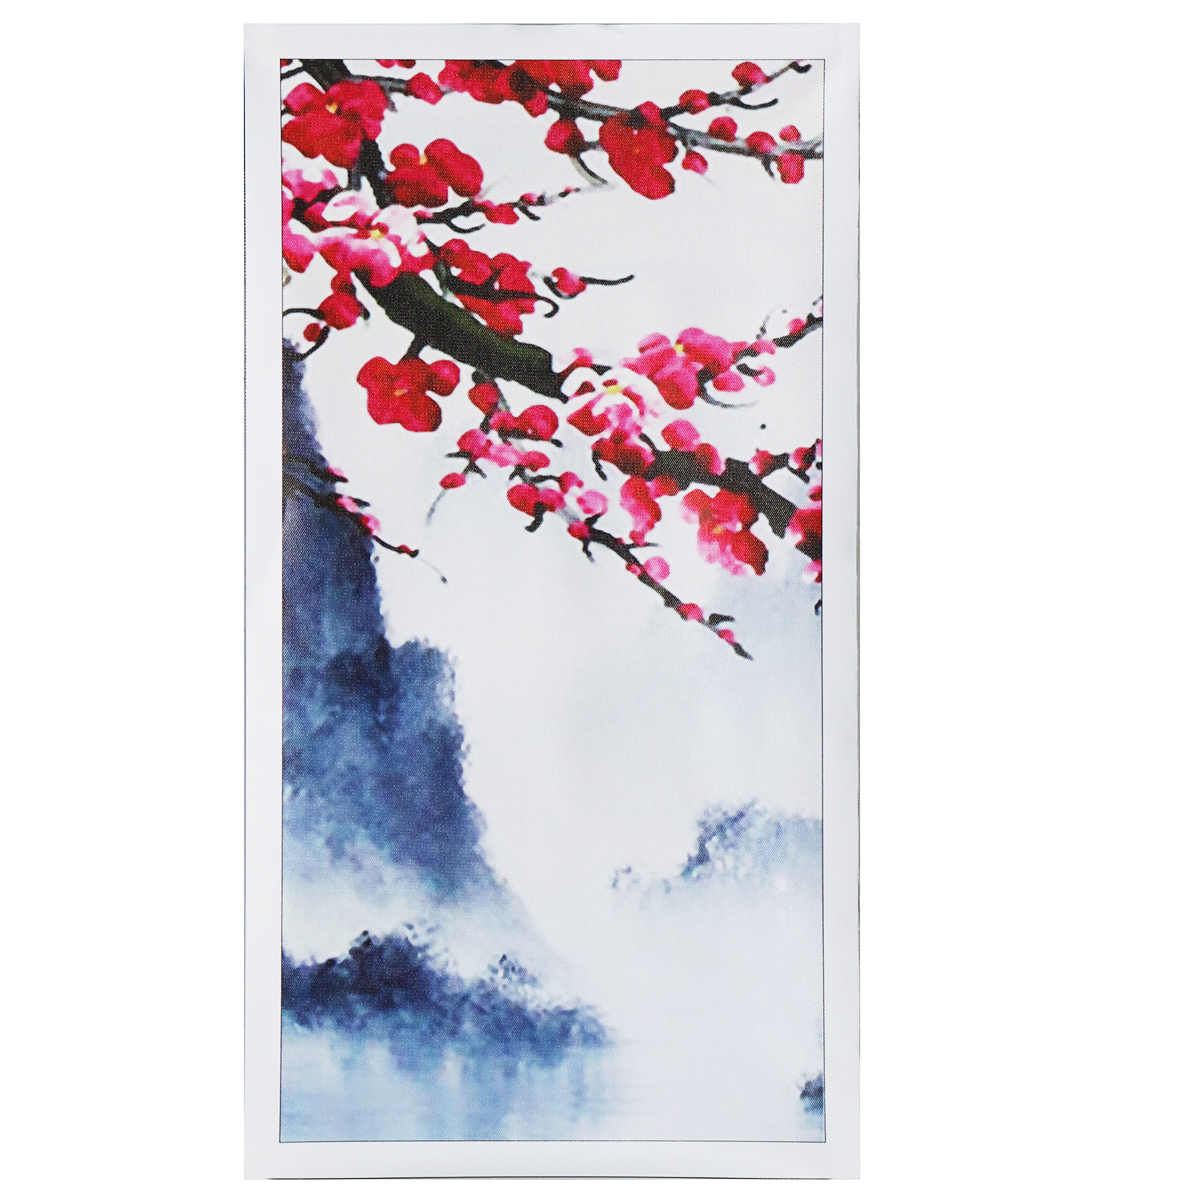 4-Pcs-Wall-Decorative-Painting-Modern-Abstract-Wall-Decor-Plum-Blossom-Art-Pictures-Canvas-Prints-Ho-1319561-8